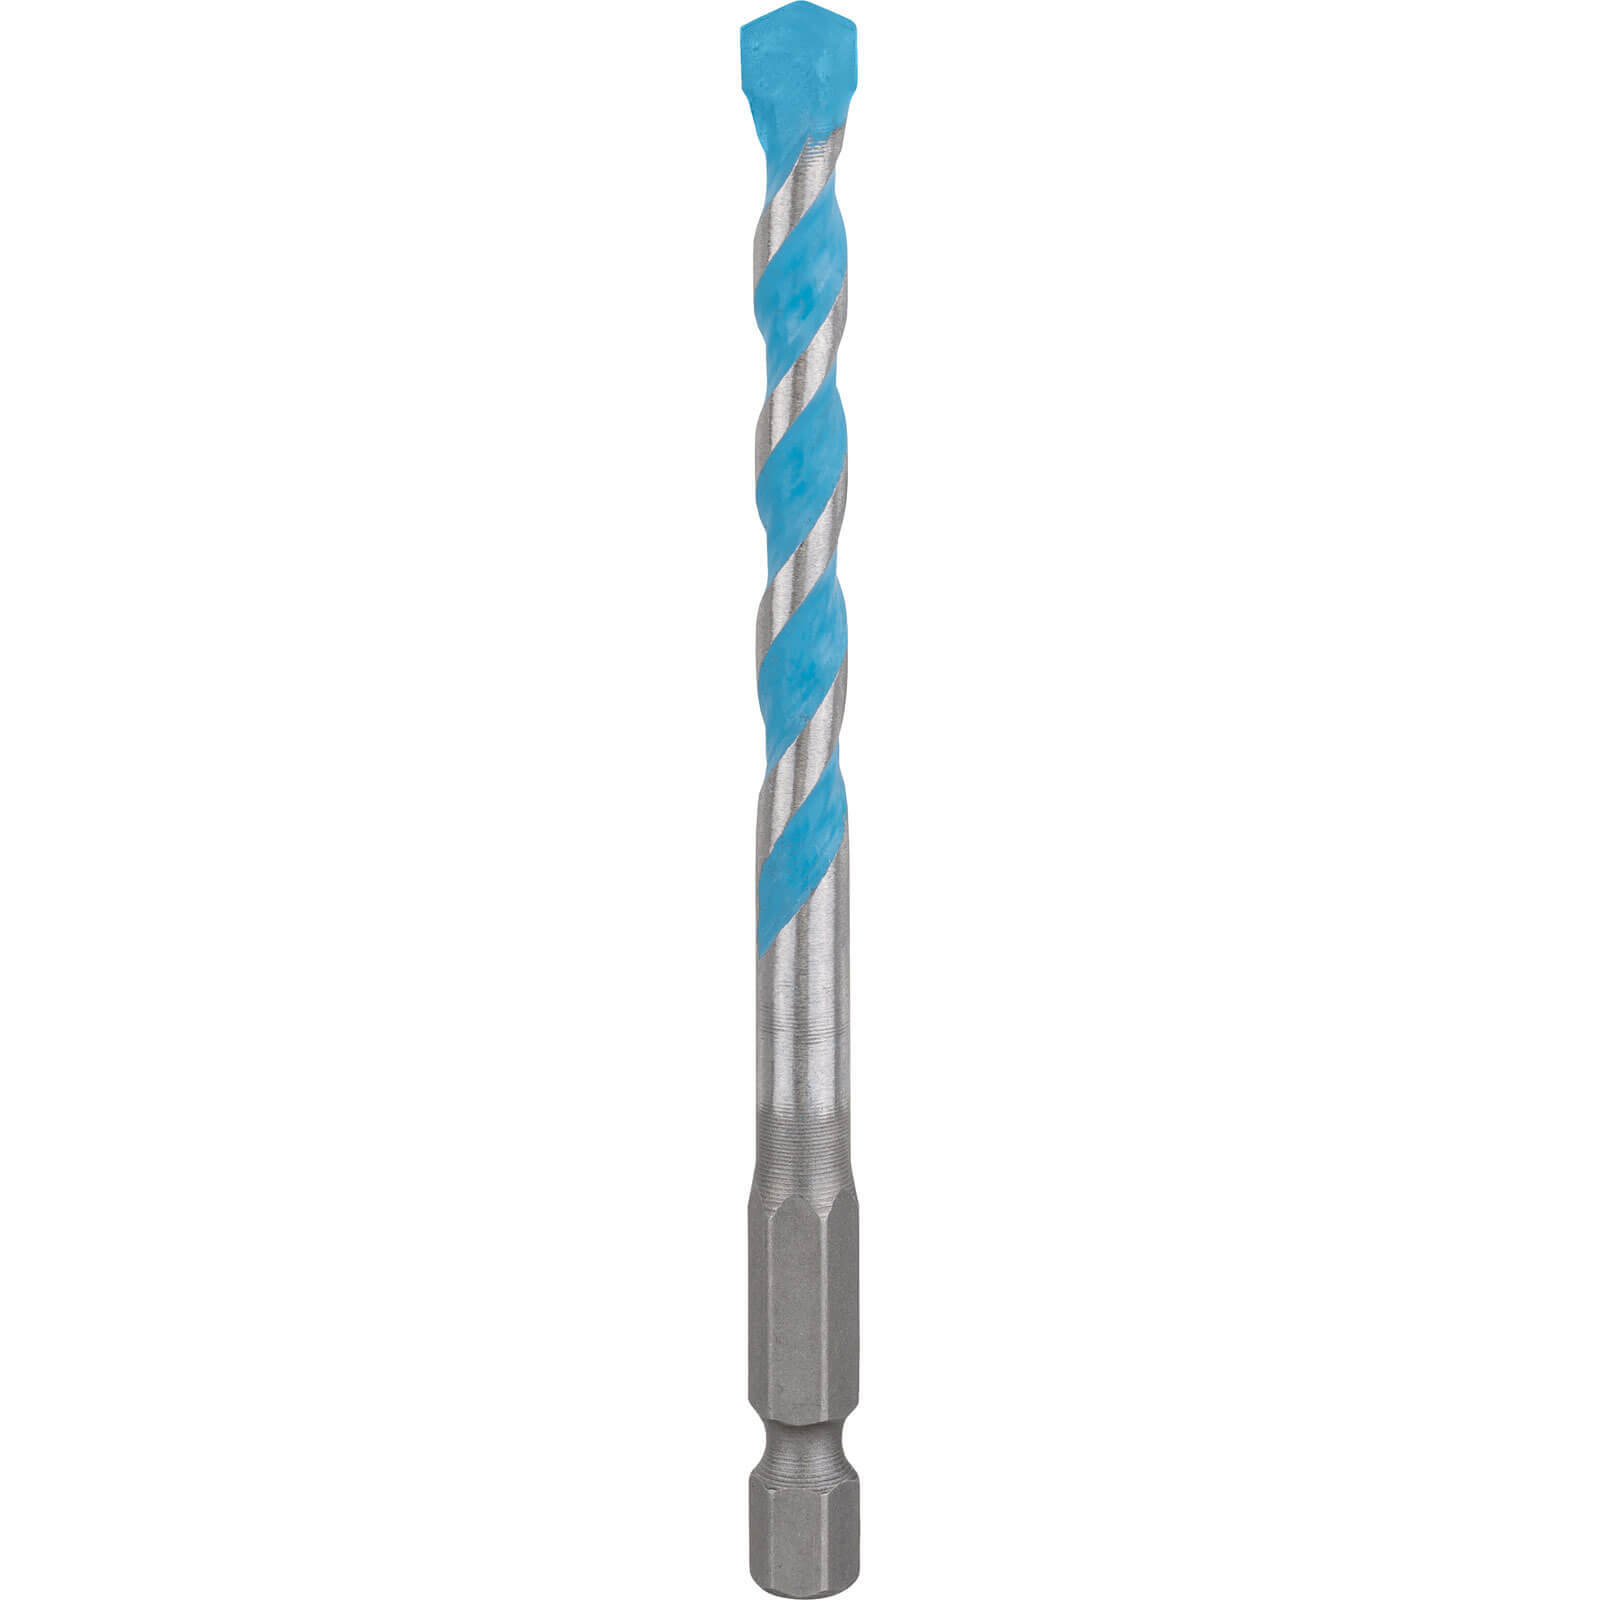 Image of Bosch Expert HEX-9 Multi Construction Drill Bit 6.5mm 100mm Pack of 1